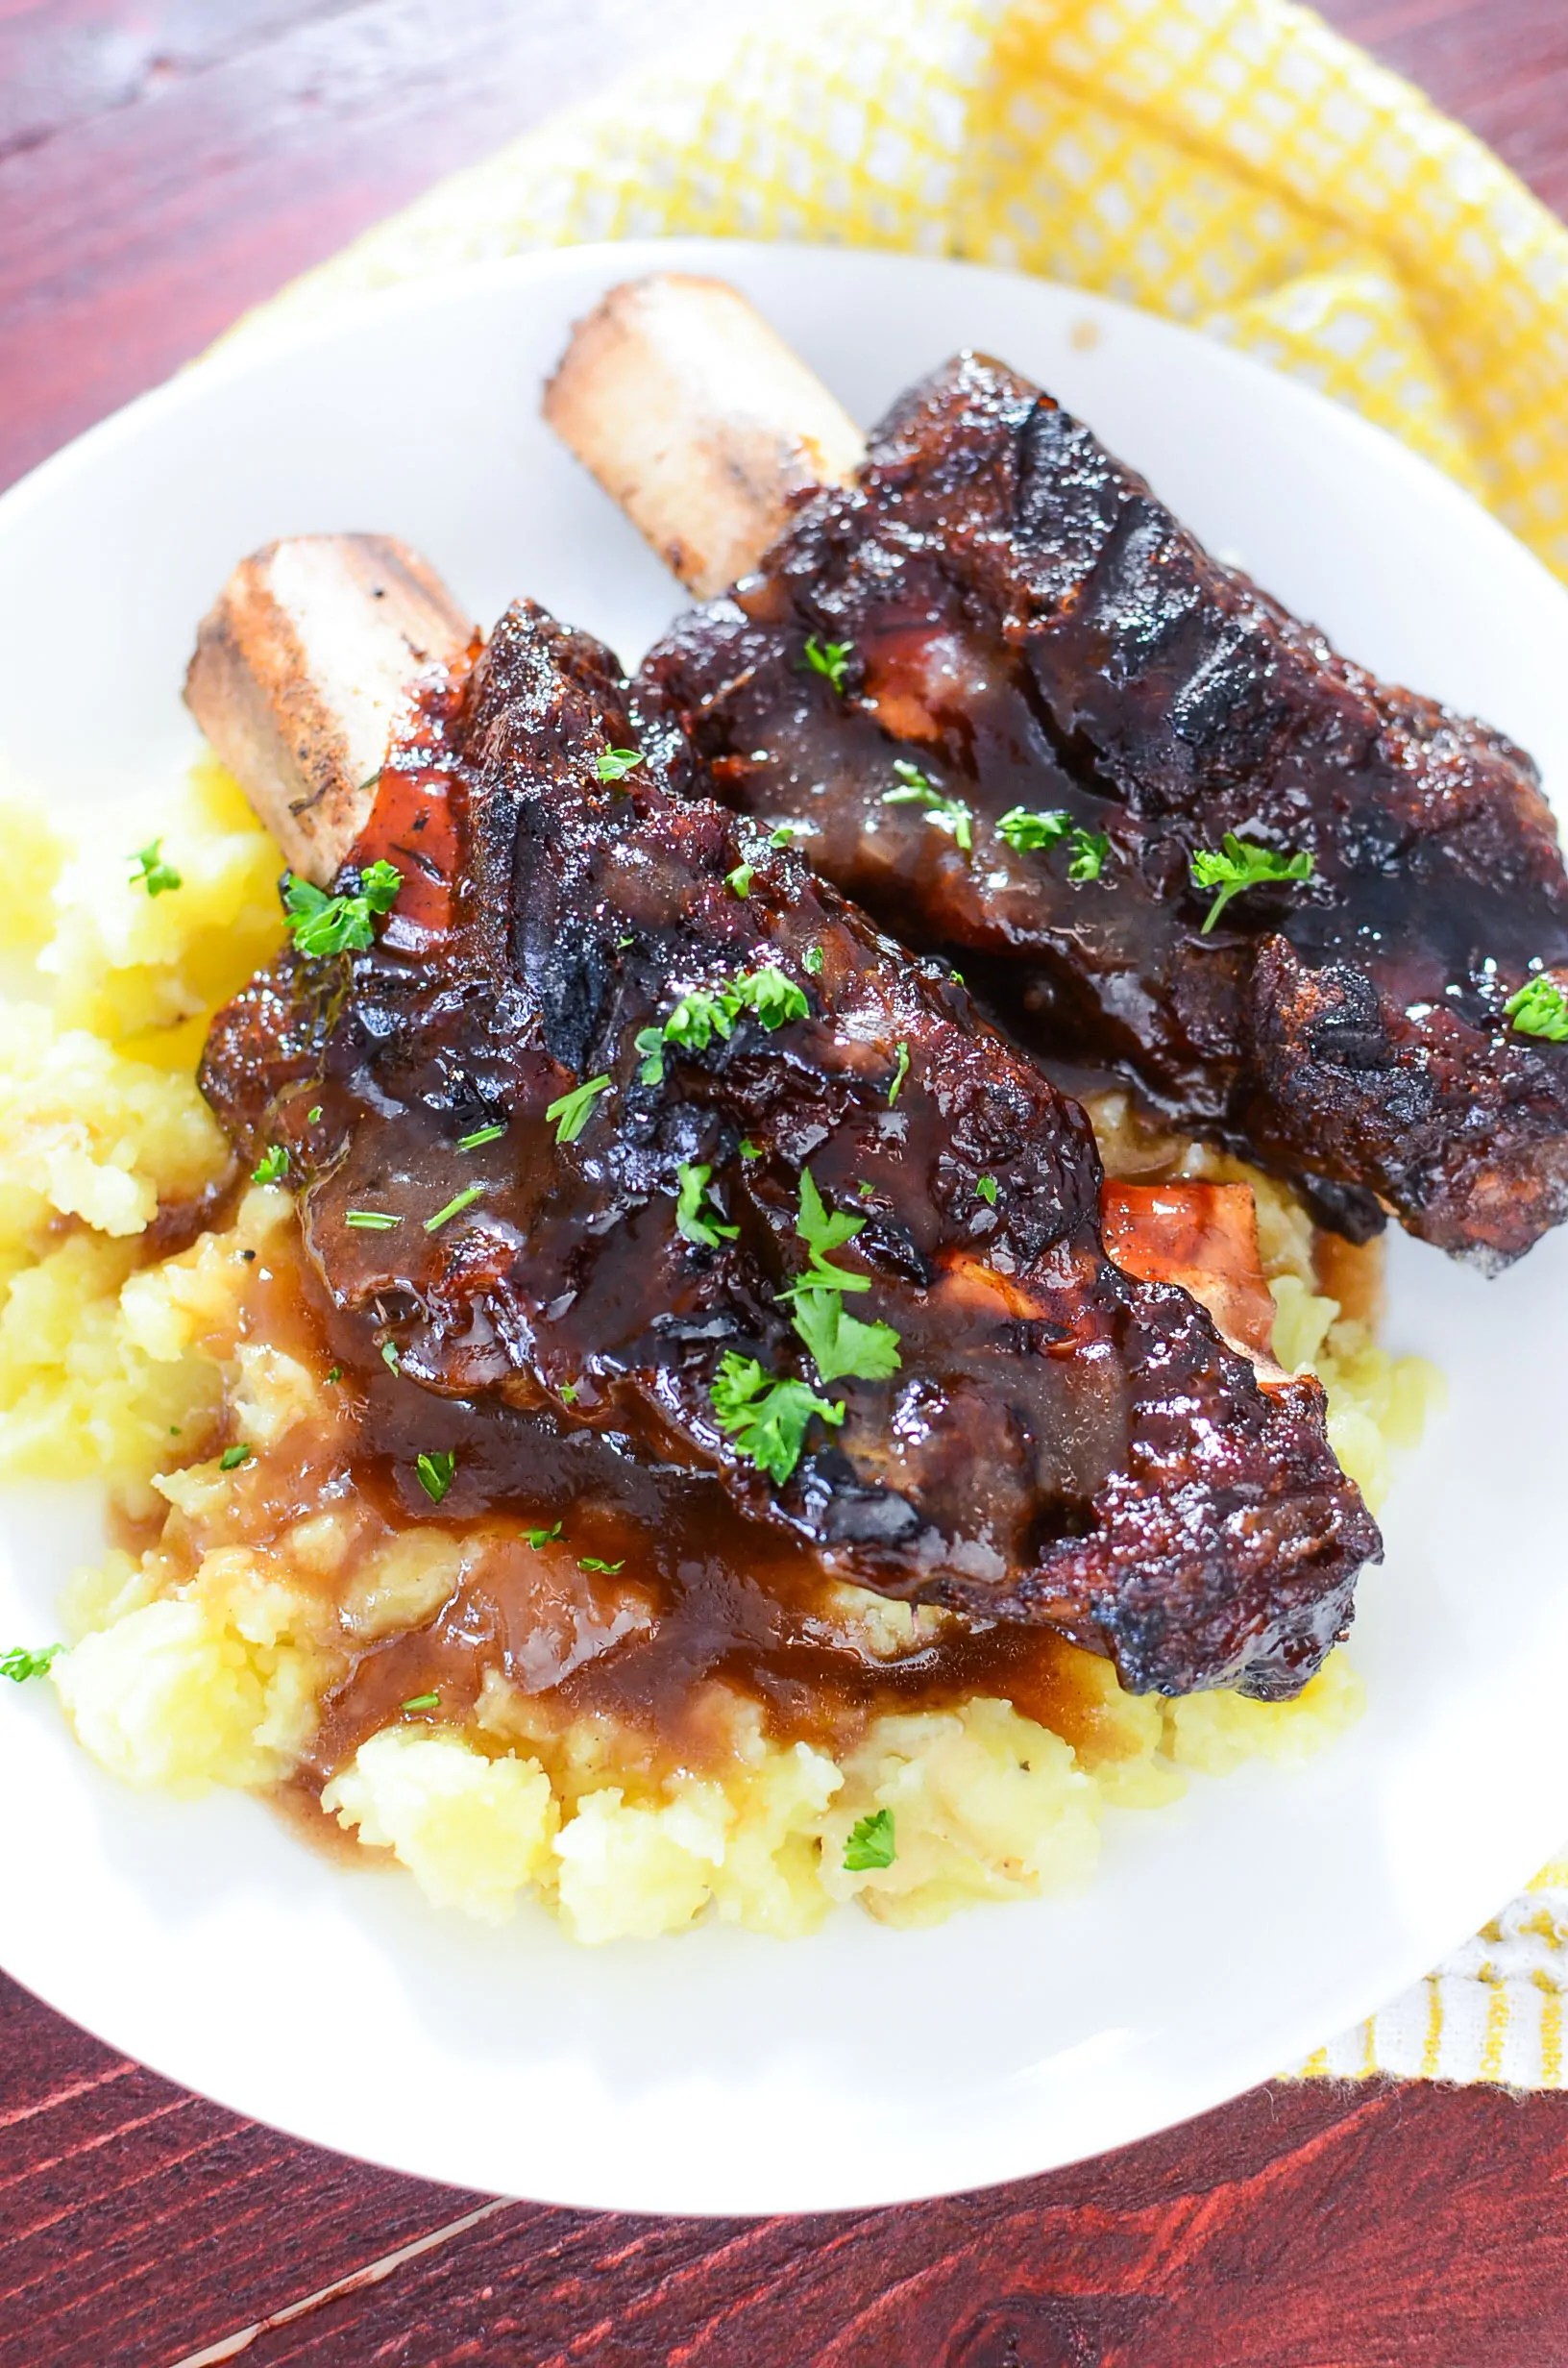 A delicious looking photo of two bbq beef short ribs resting on a bed of mashed potatoes with gravy, on a white plate.